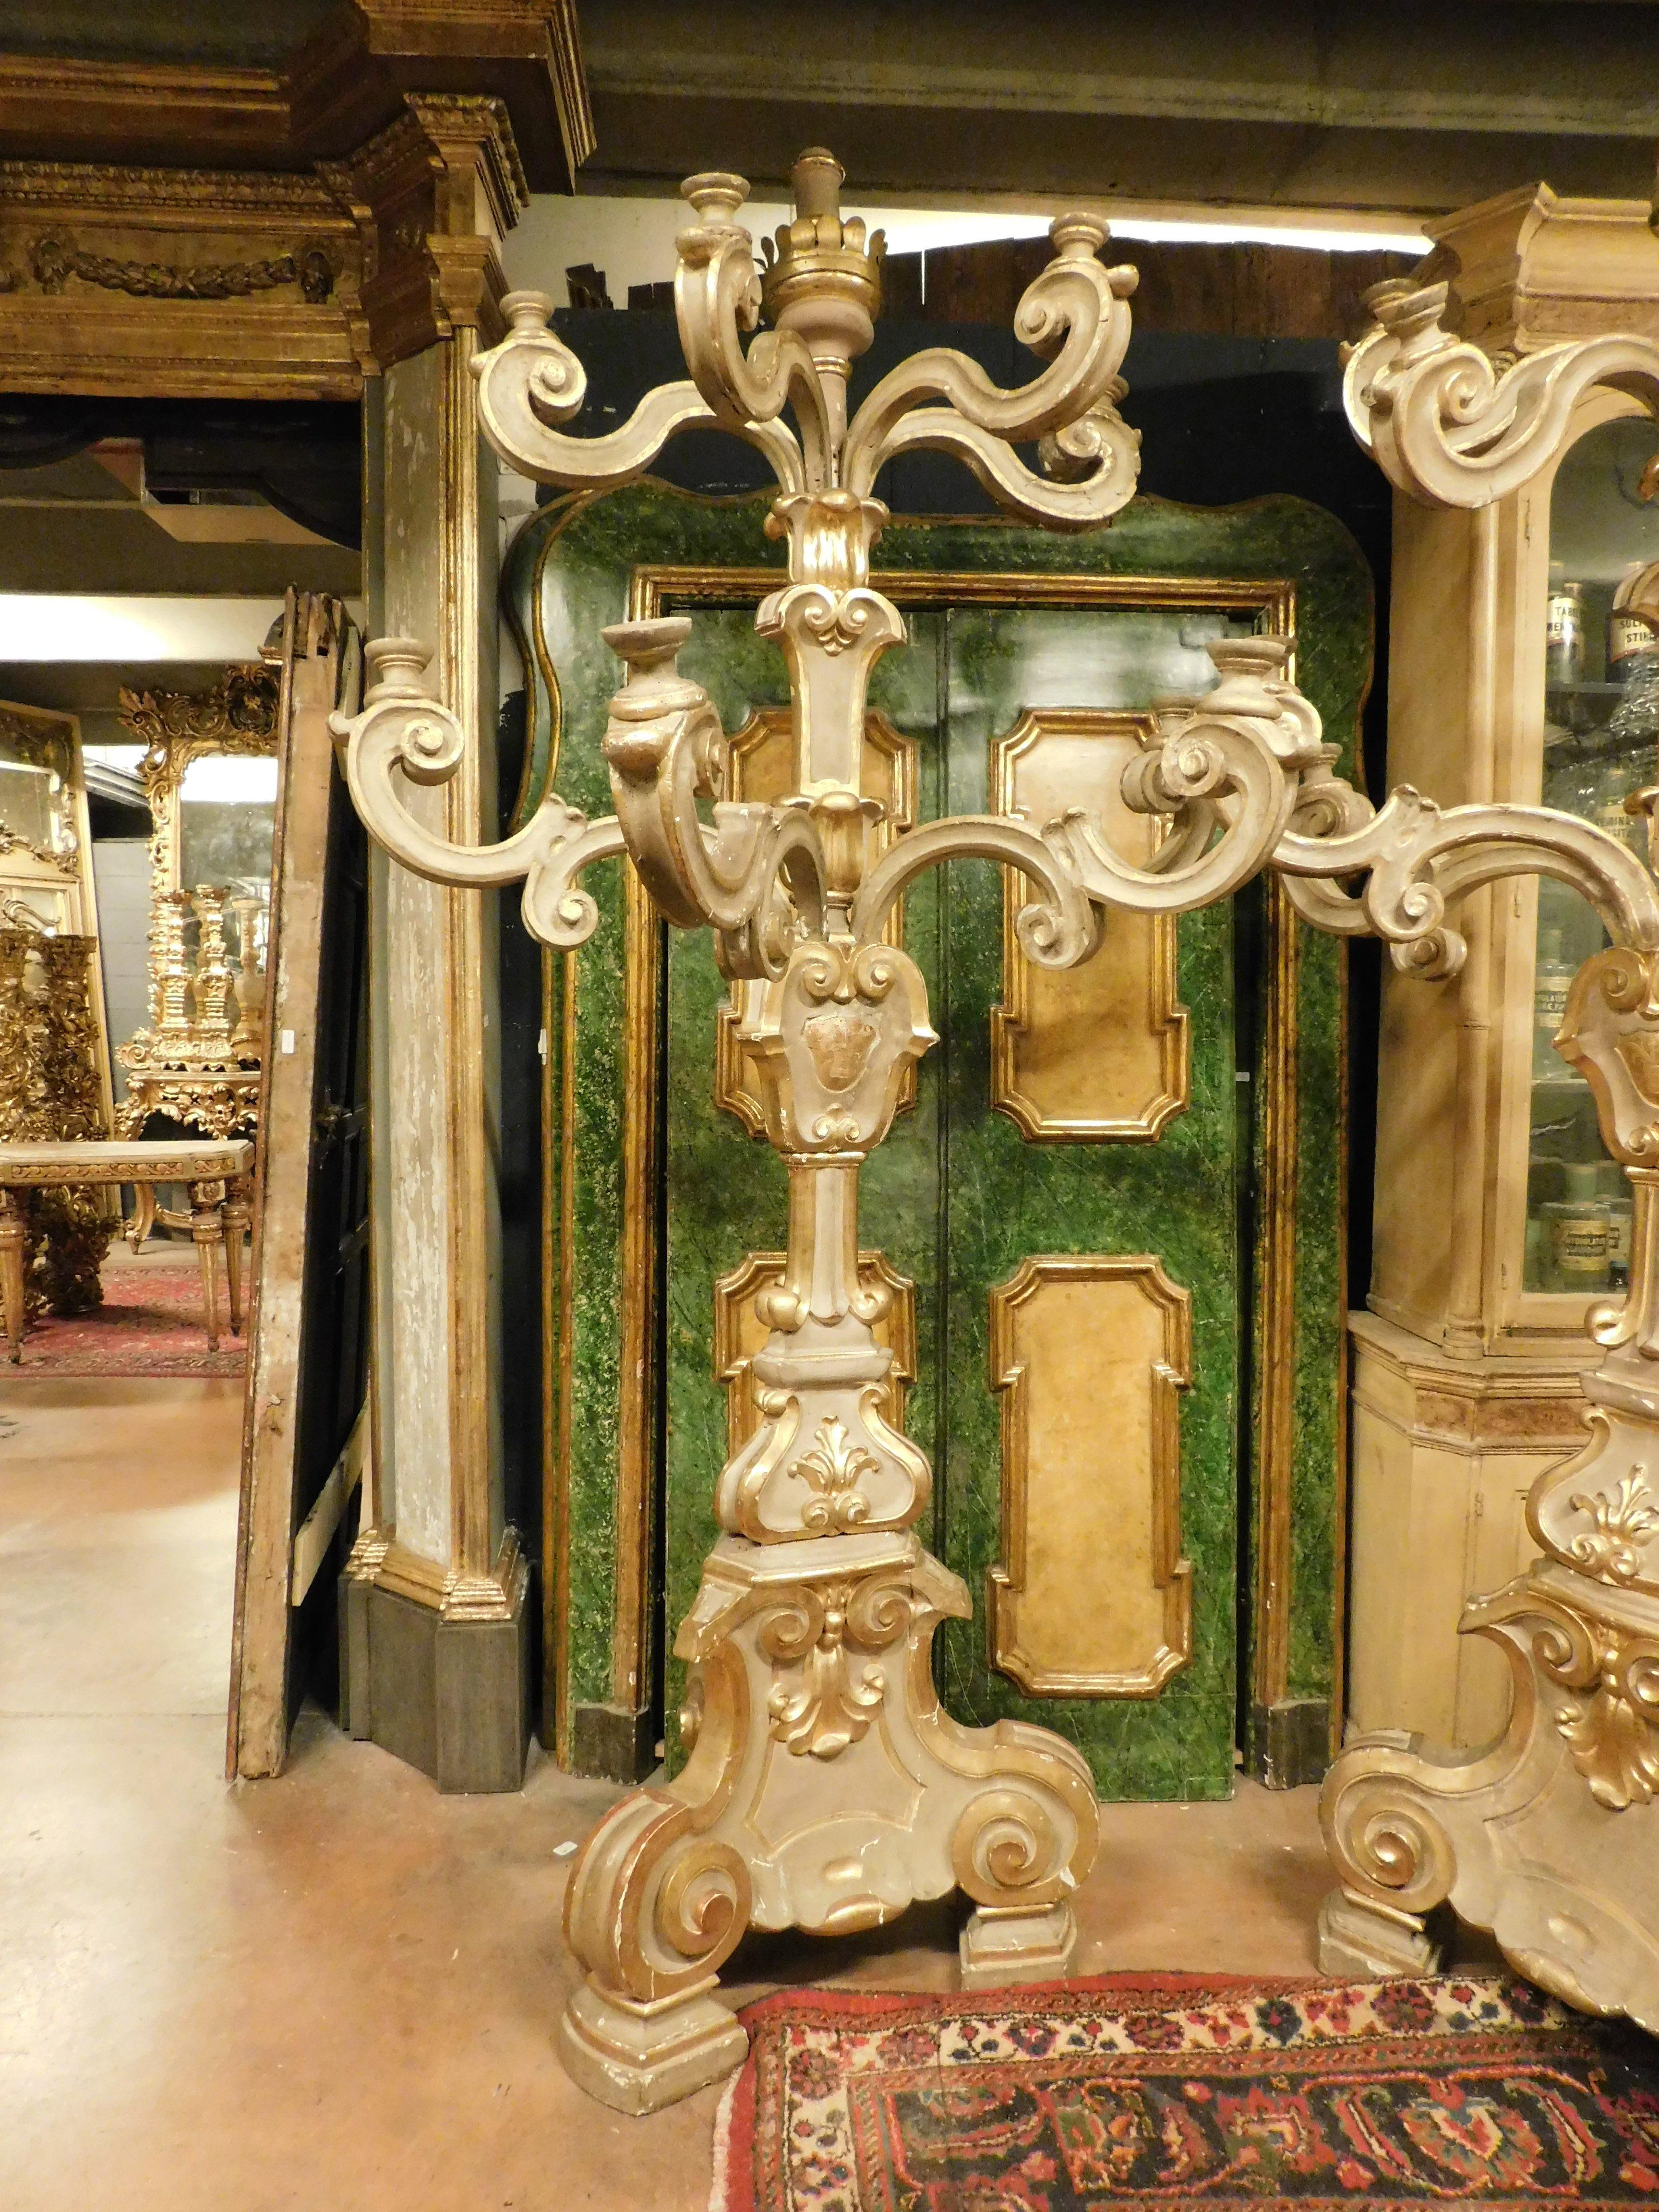 Ancient antique pair of very large and important candlesticks, tall lamp holders in gilded and richly carved wood, total of 8 arms each, moved and with a candle holder at the end, coming from an 18th century church in Florence (Italy).
Not